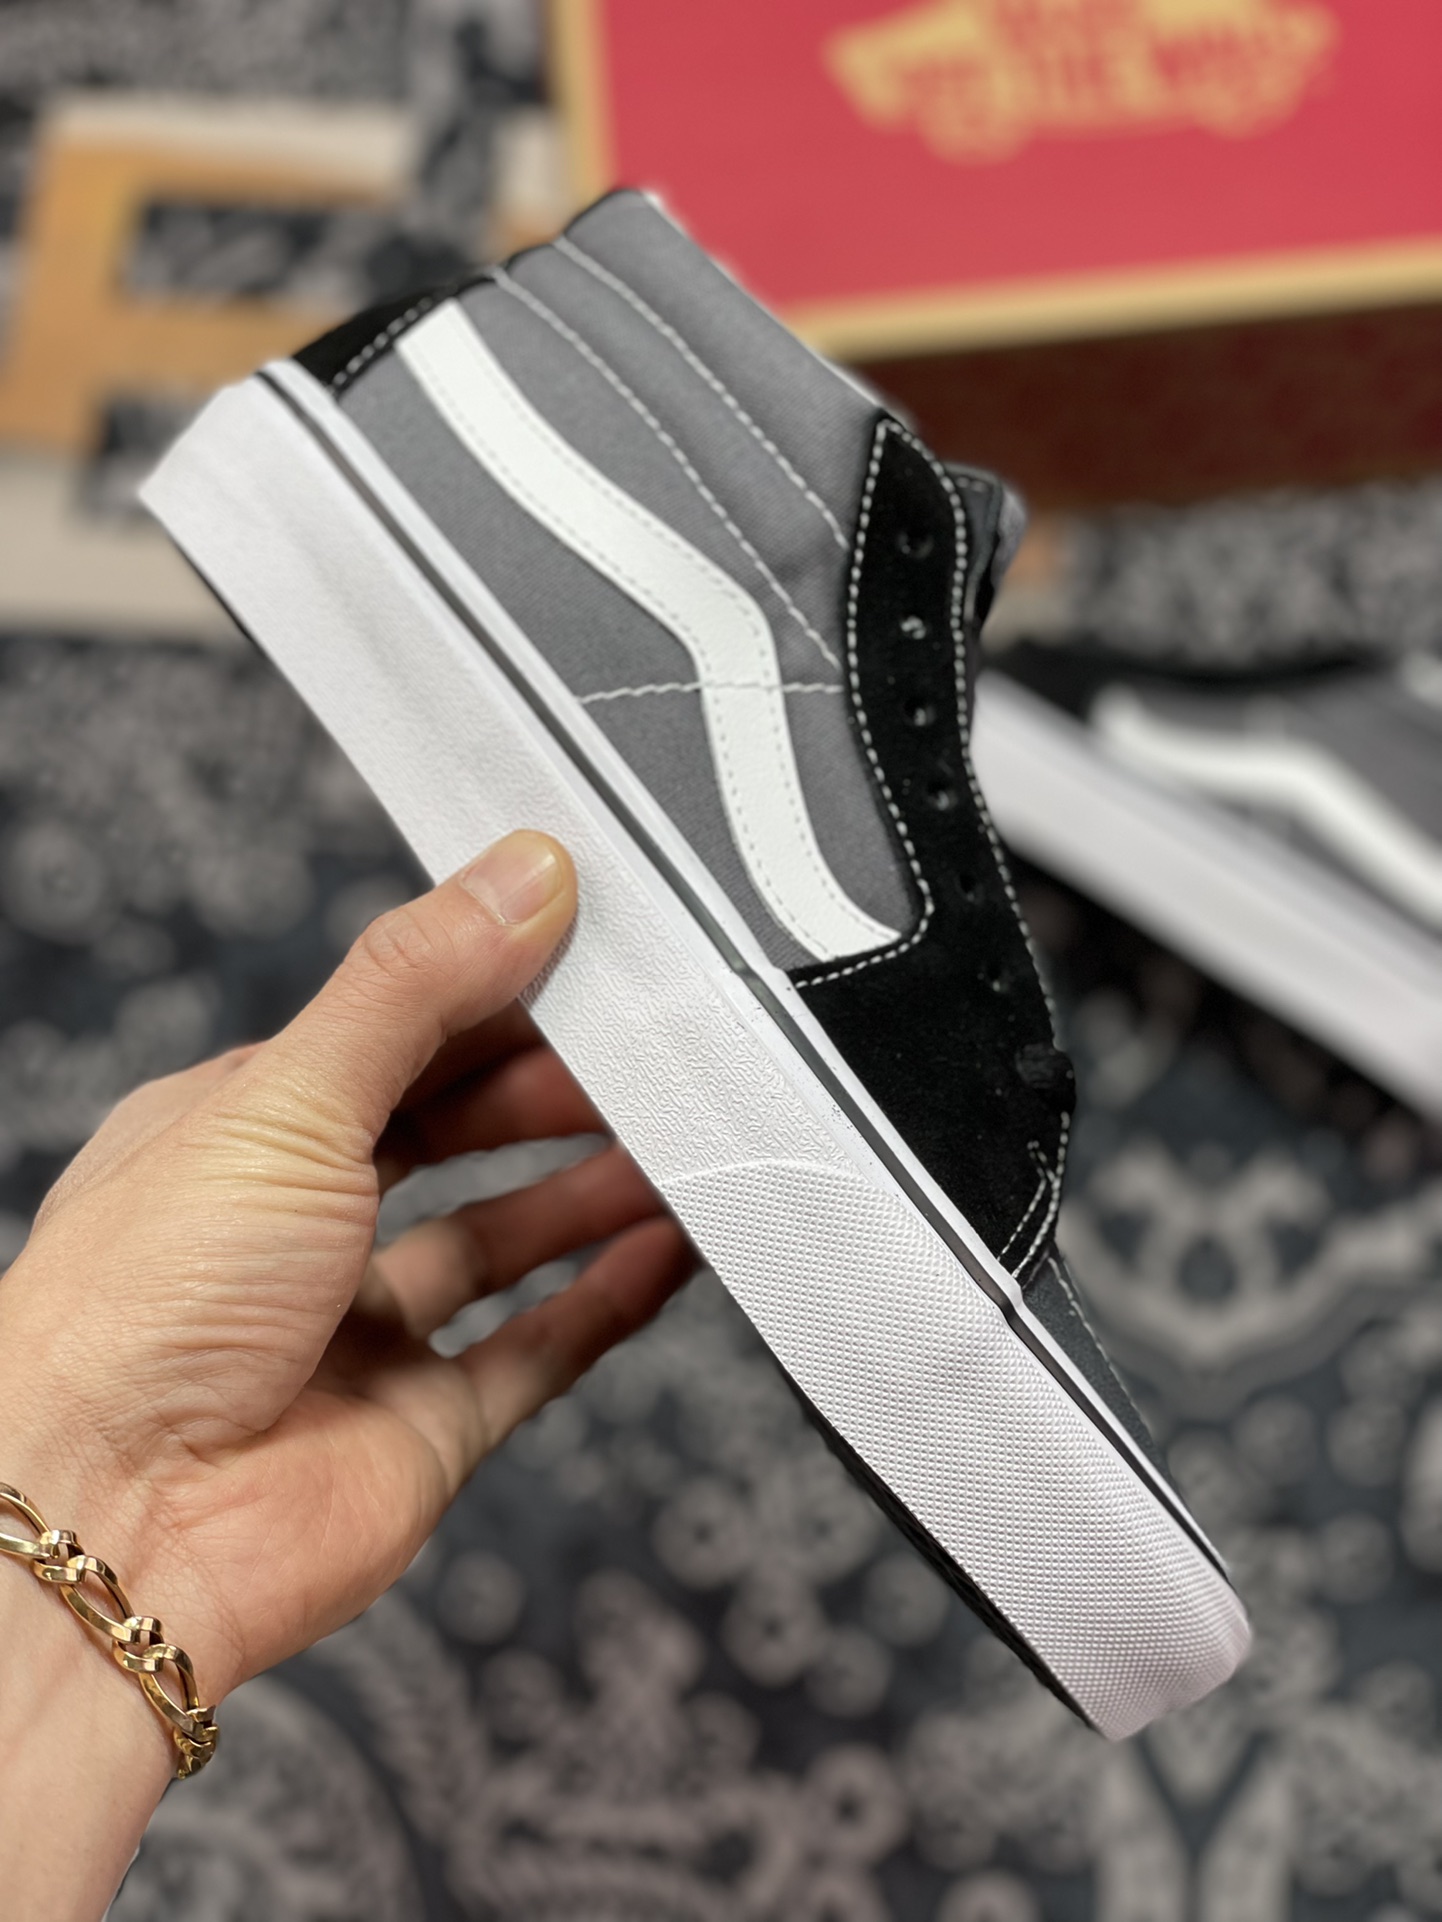 Vans Sk8 Mid Reissue black and gray mid-top retro casual canvas skate shoes